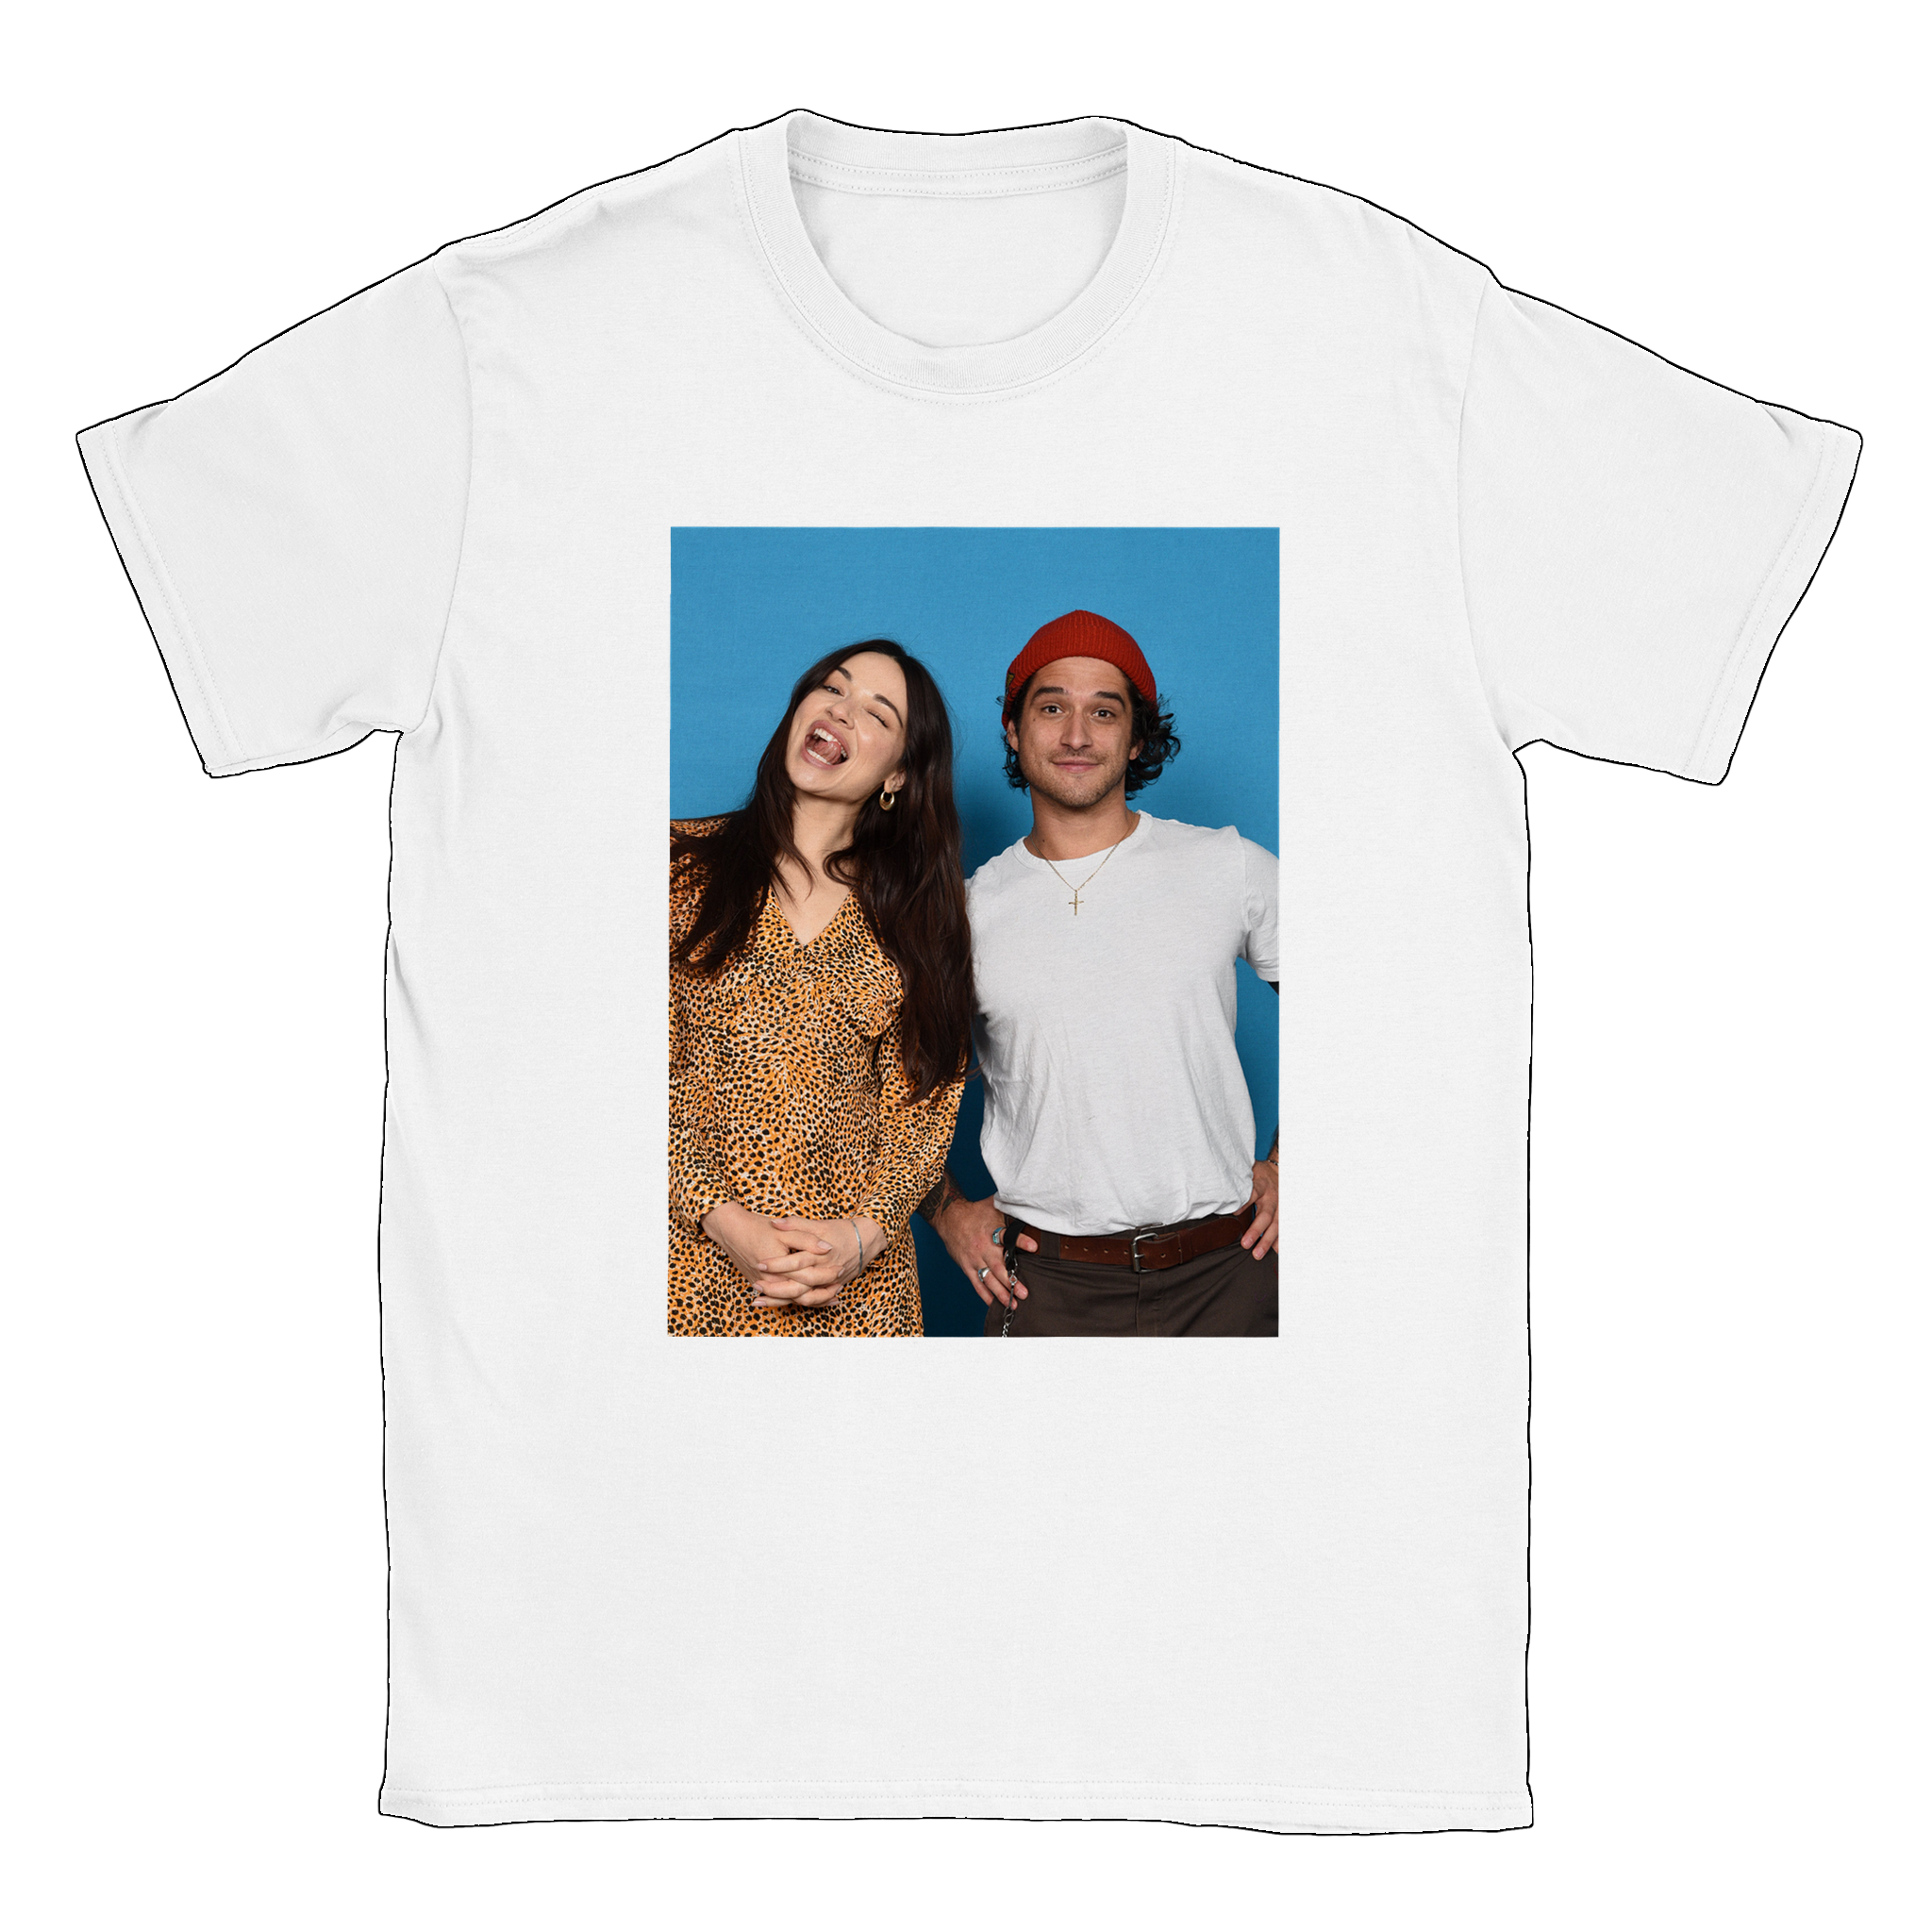 T-shirt TYLER POSEY & CRYSTAL REED